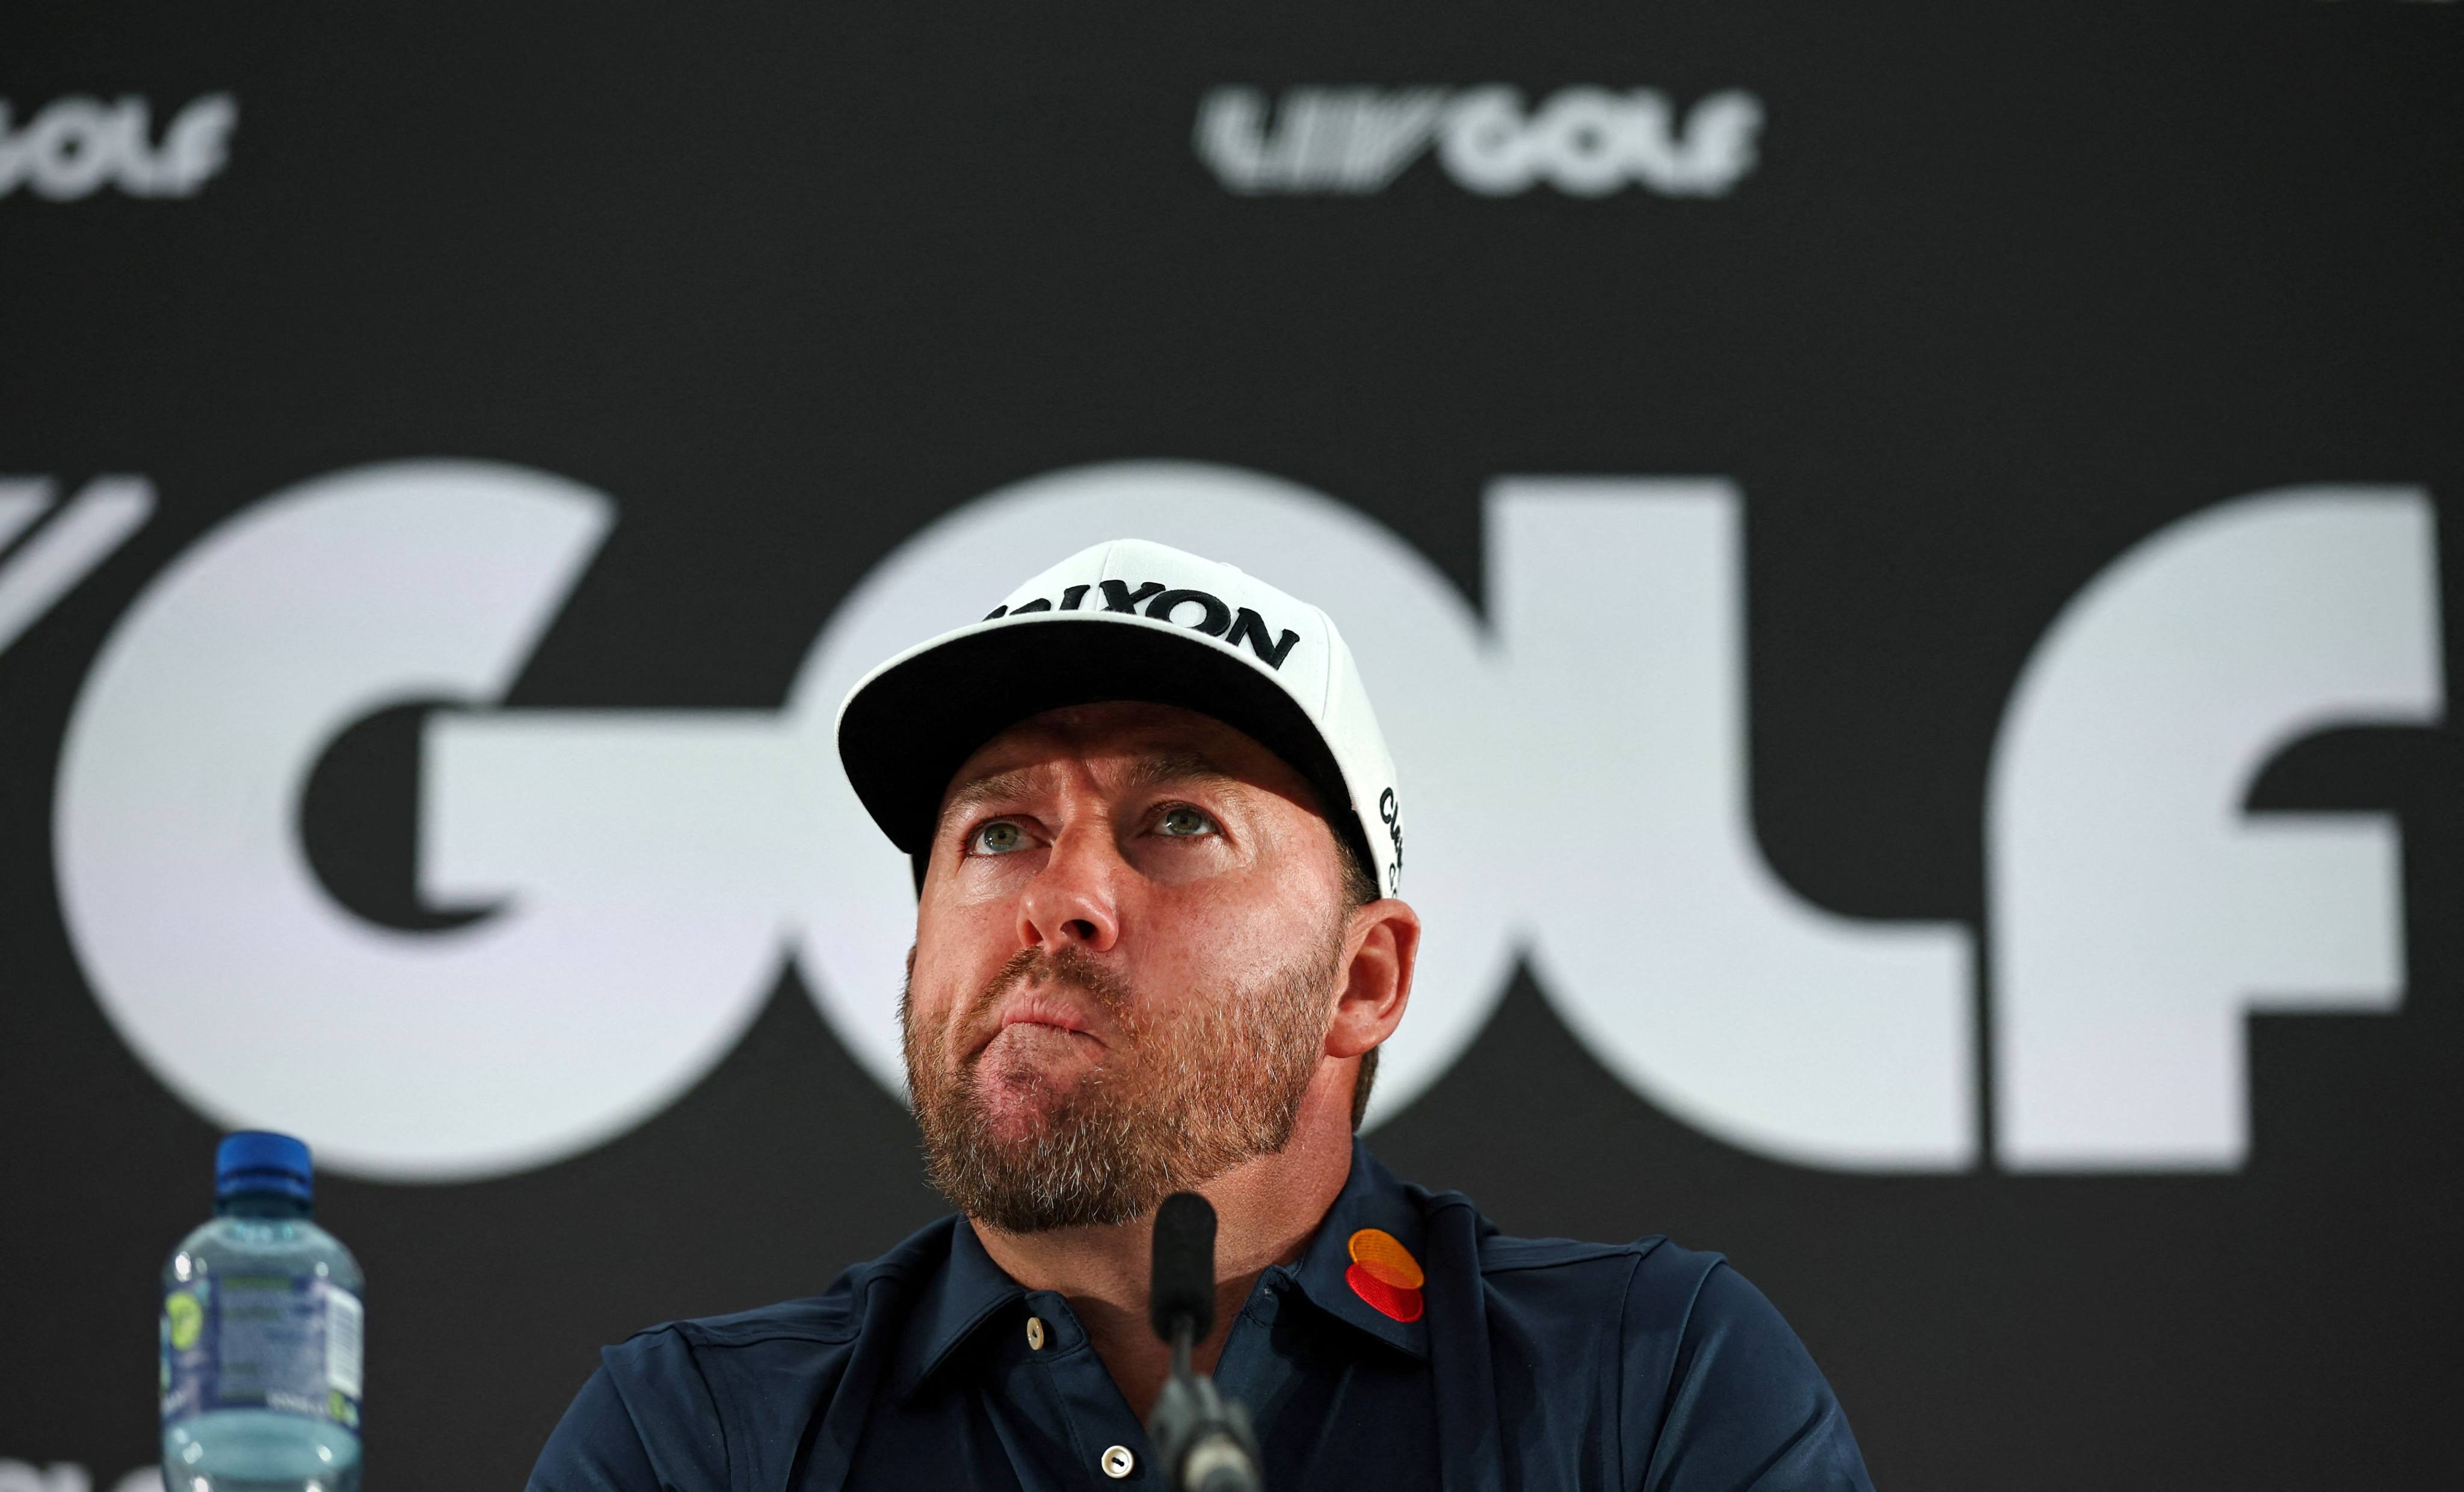 Graeme McDowell said the circuit was ‘polarising’ but that he was proud to be part of it. Photo: AFP